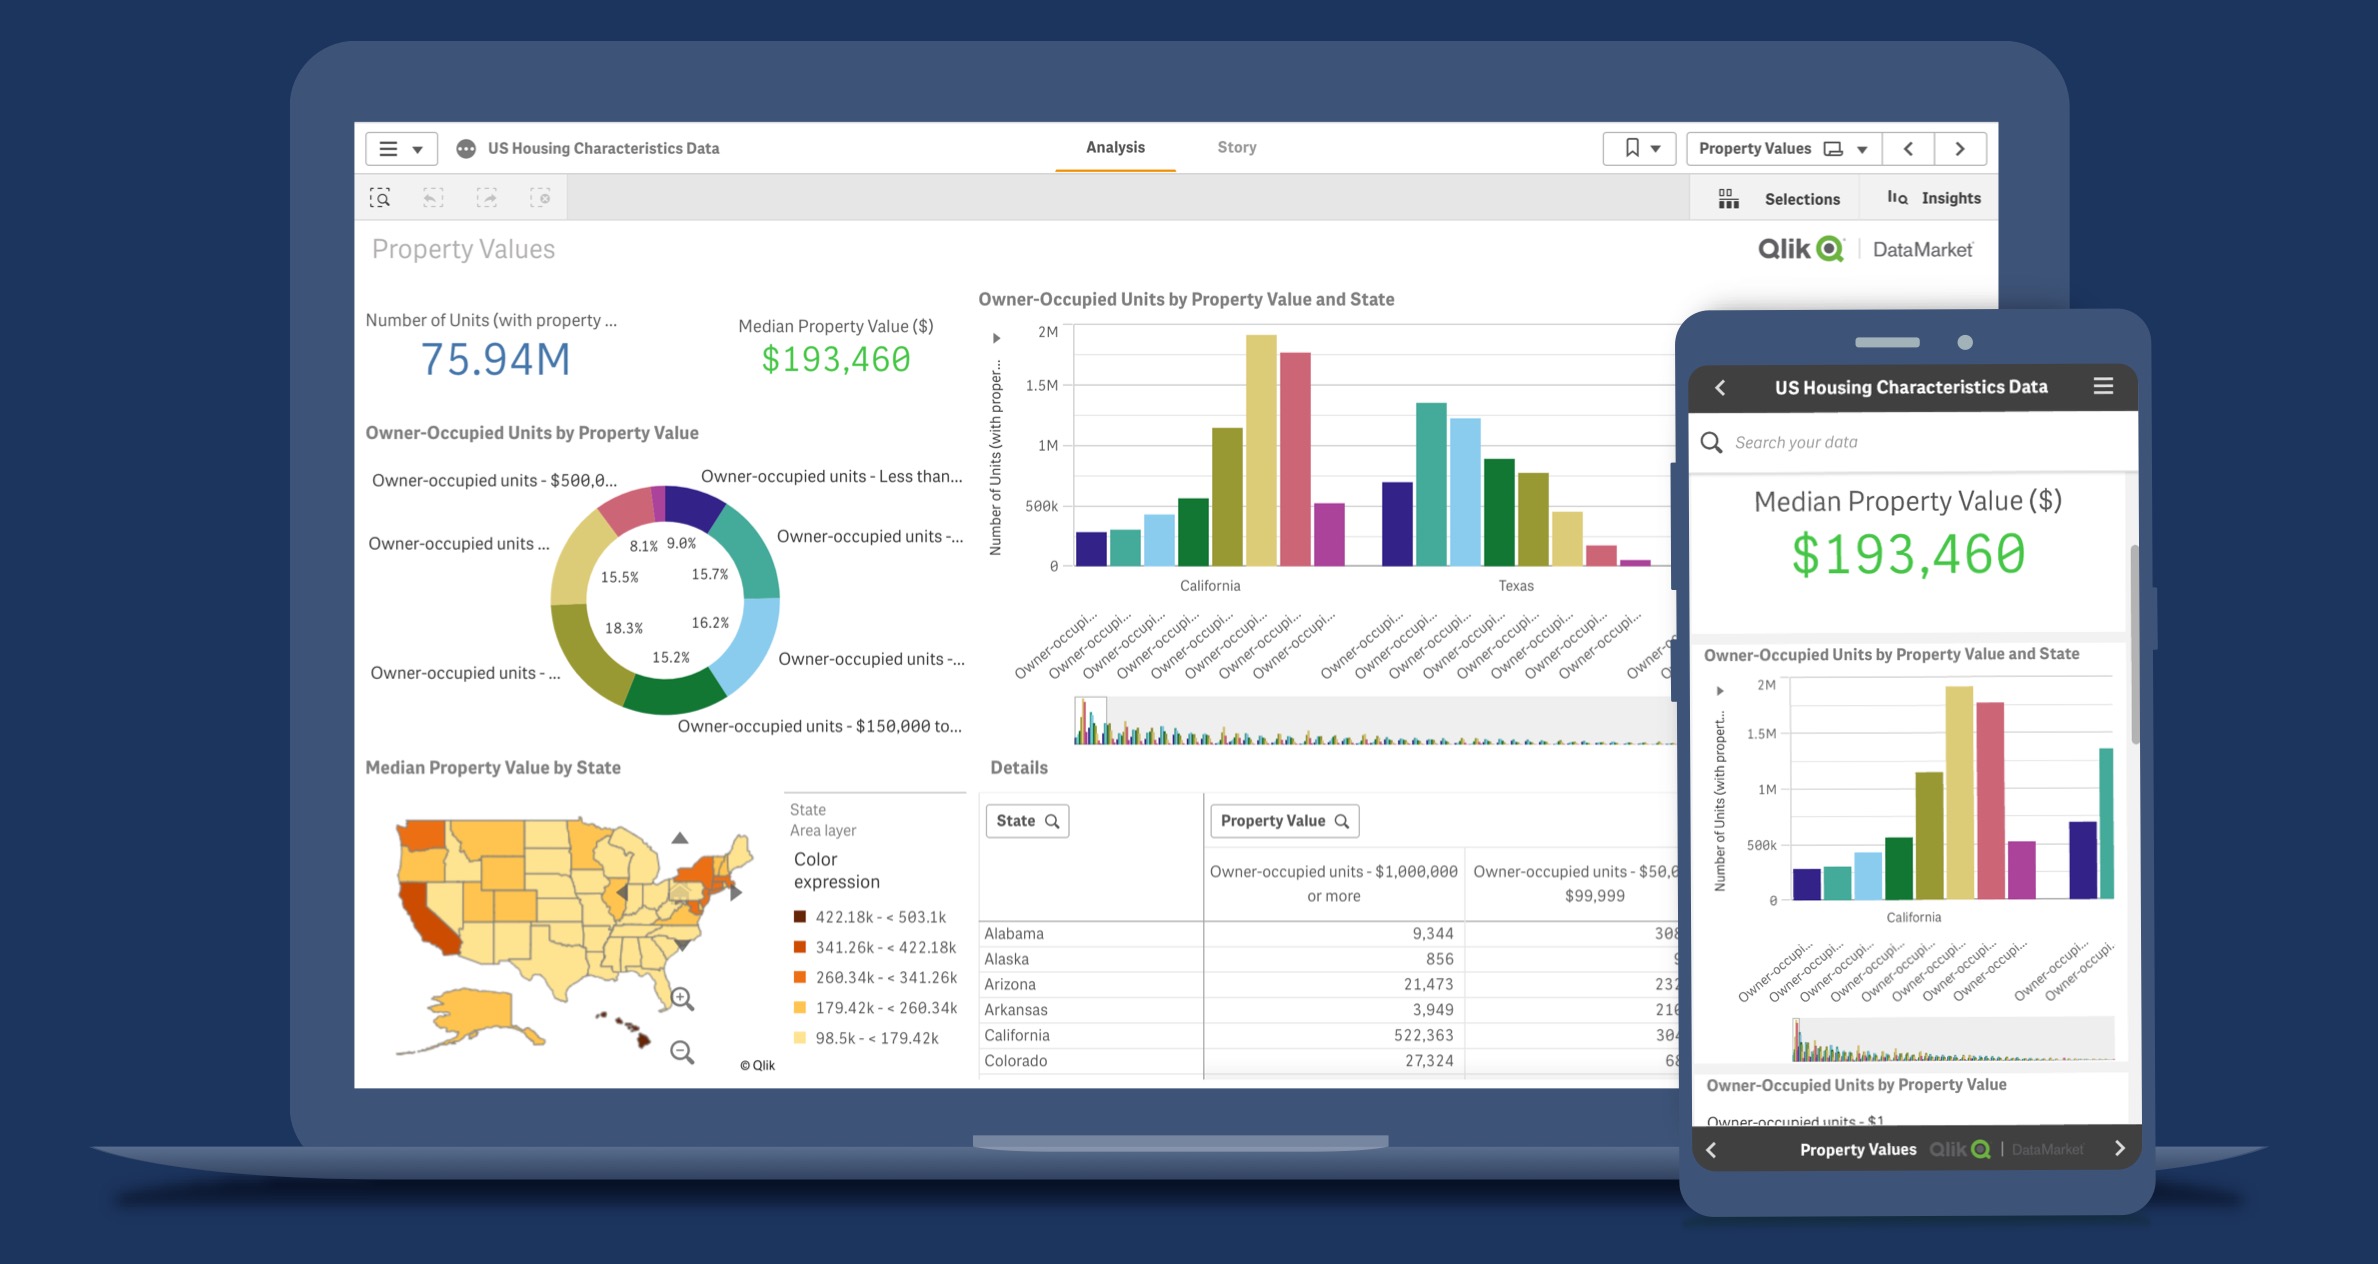 A Qlik Sense dashboard design example showing key metrics, interactive charts, AI-powered recommendations and mobile version.